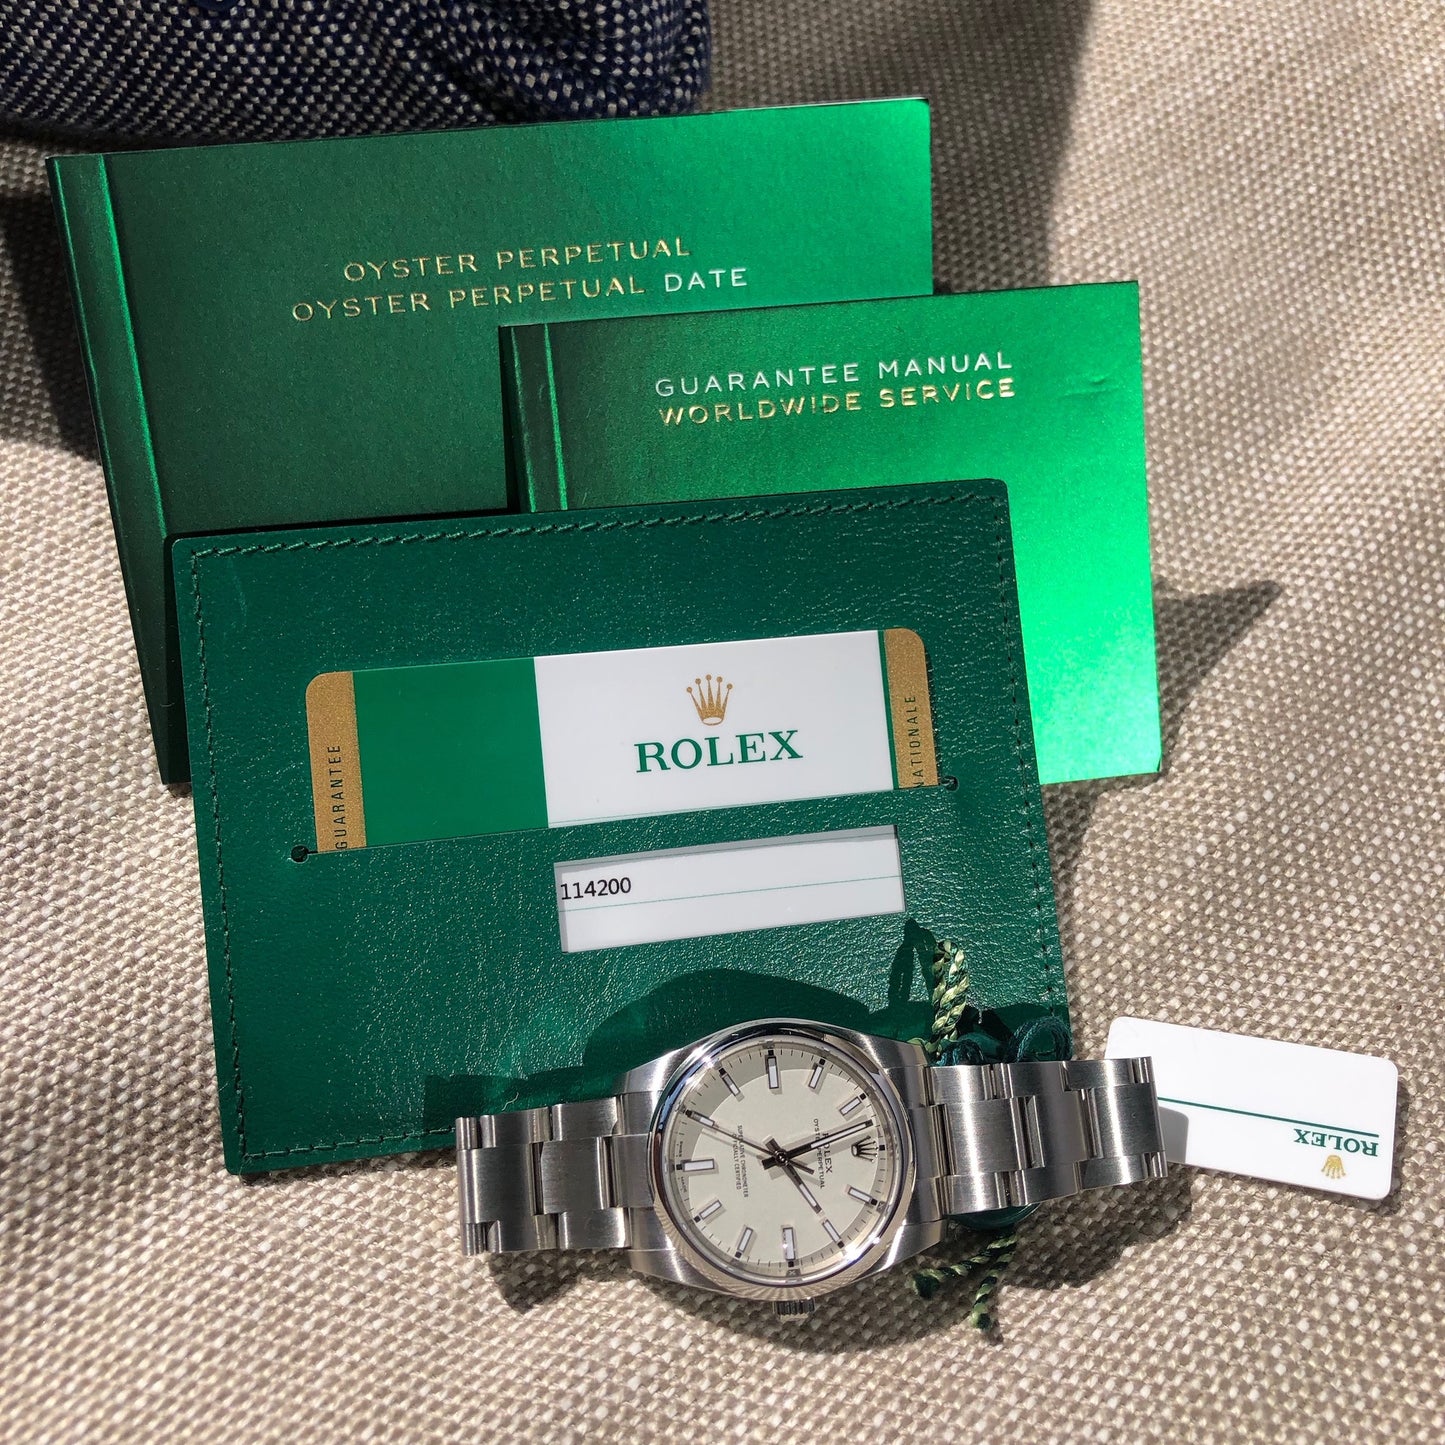 Rolex Oyster Perpetual 114200 White Stainless Steel Automatic Wristwatch Box Papers Circa 2019 - Hashtag Watch Company